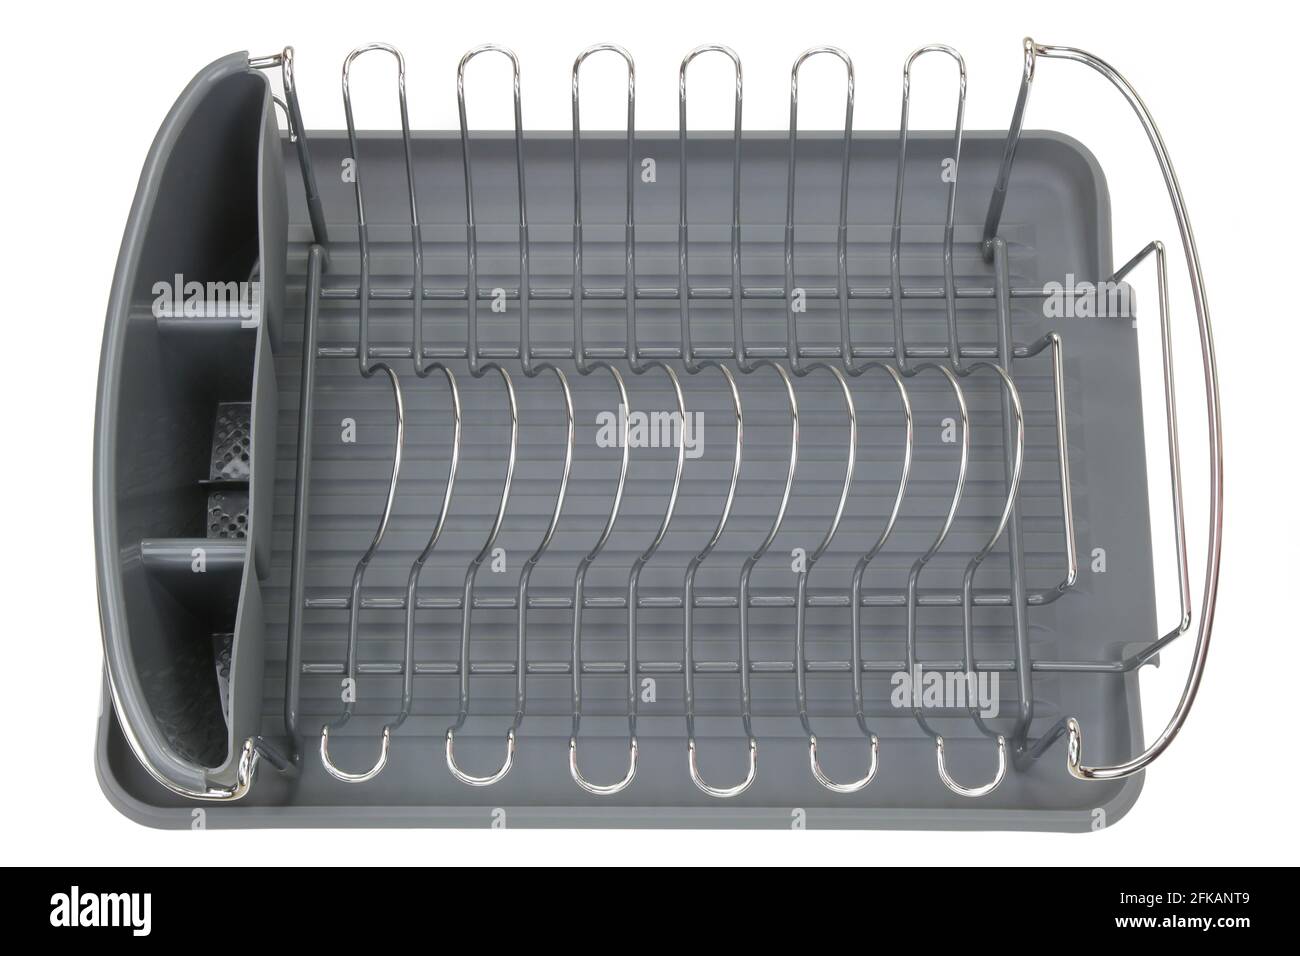 https://c8.alamy.com/comp/2FKANT9/empty-aluminum-dish-rack-shelf-with-a-gray-tray-for-drying-dish-and-kitchenware-isolated-on-white-2FKANT9.jpg